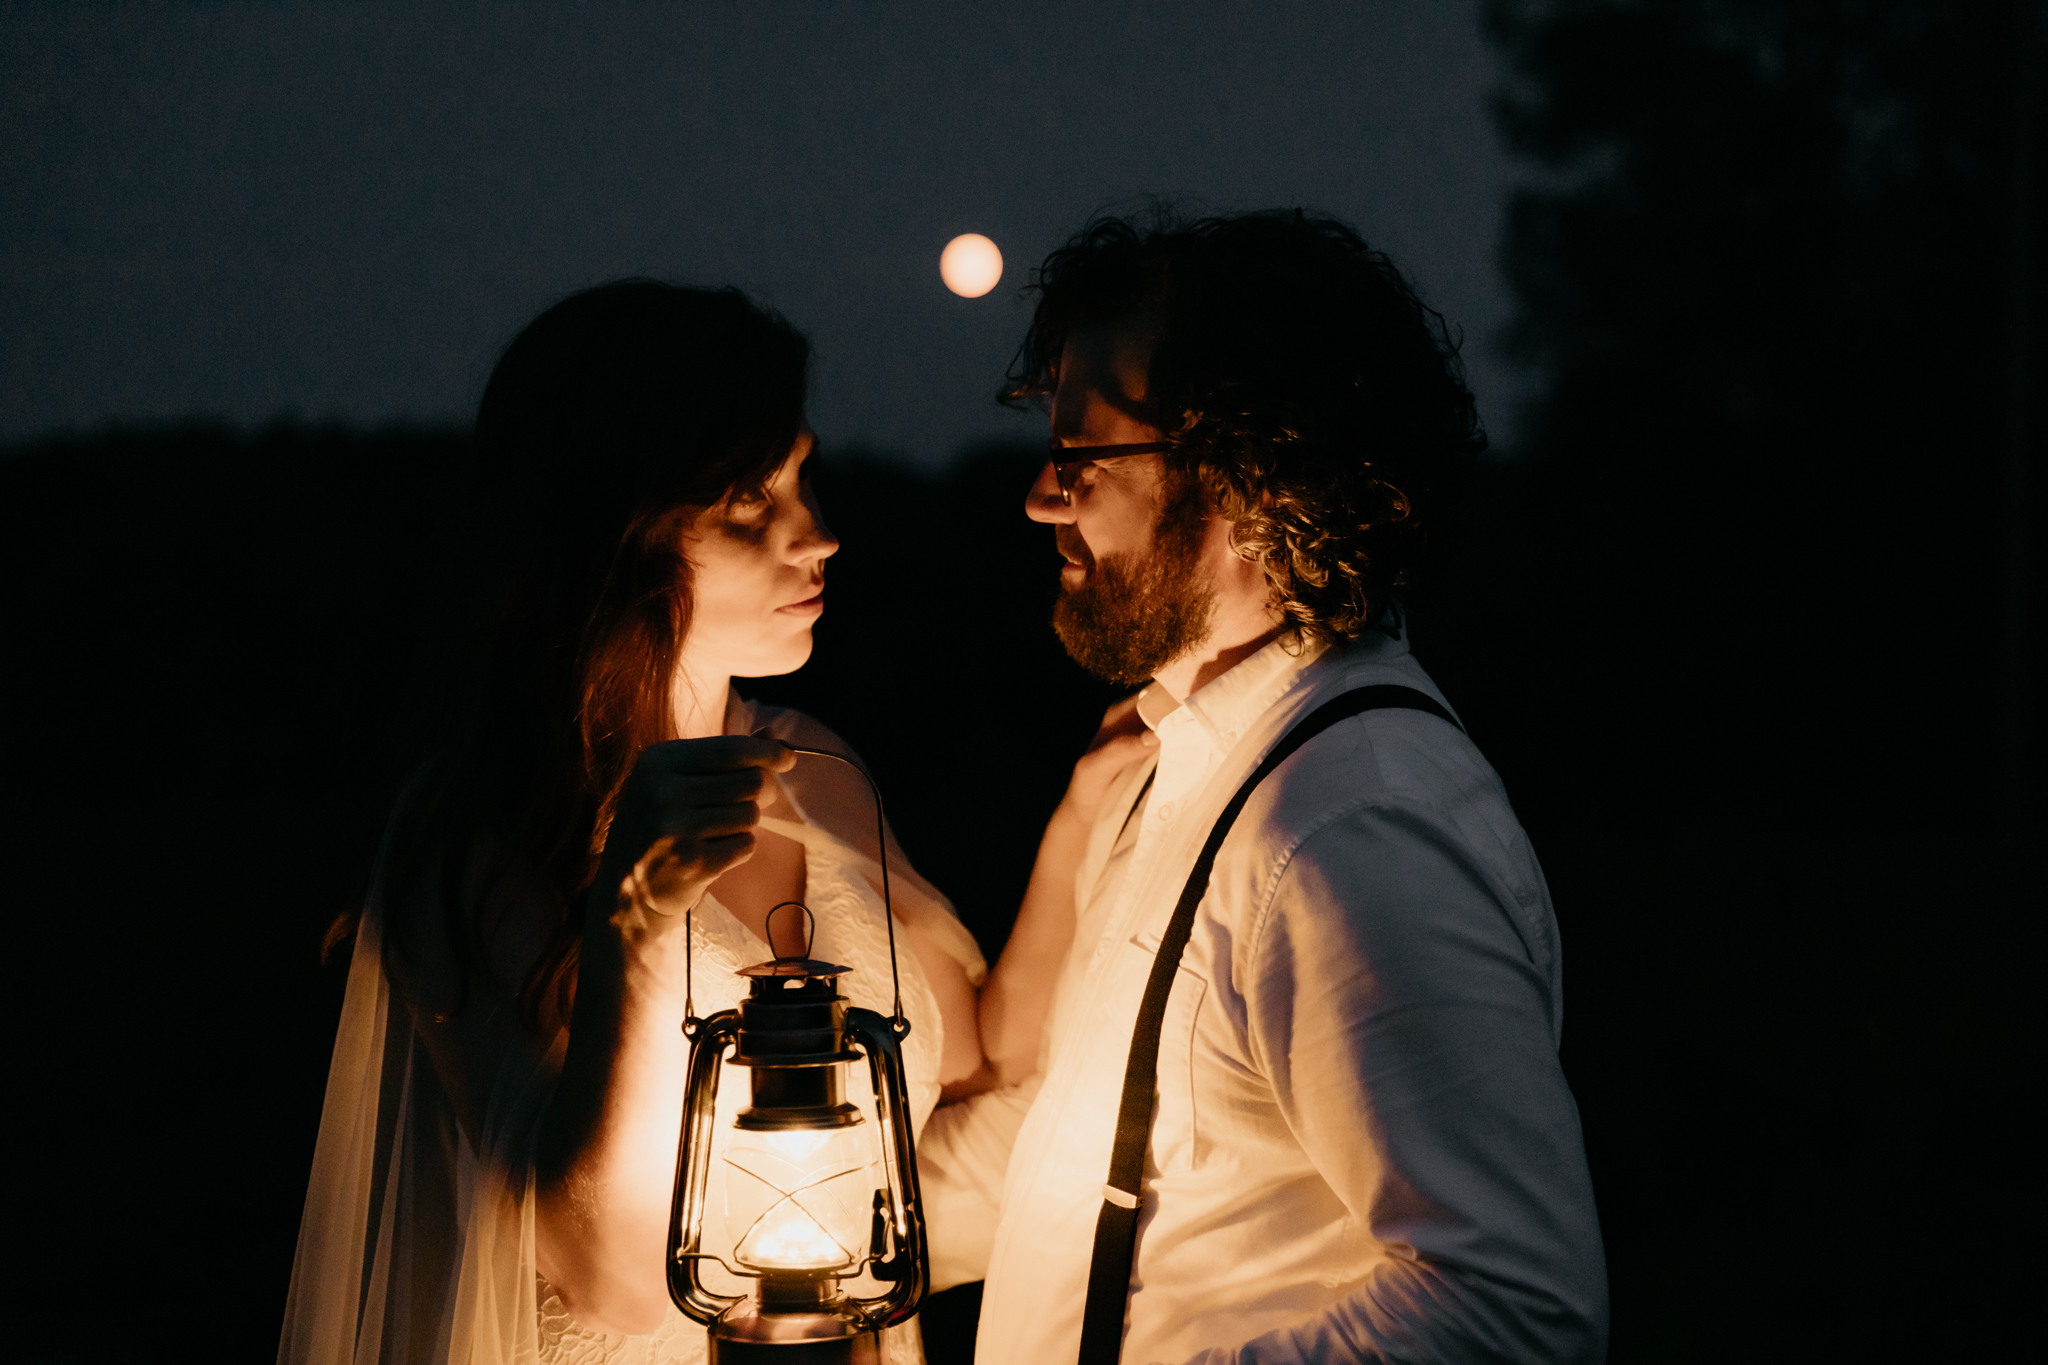 Full moon and lantern portraits during this Michigan summer elopement